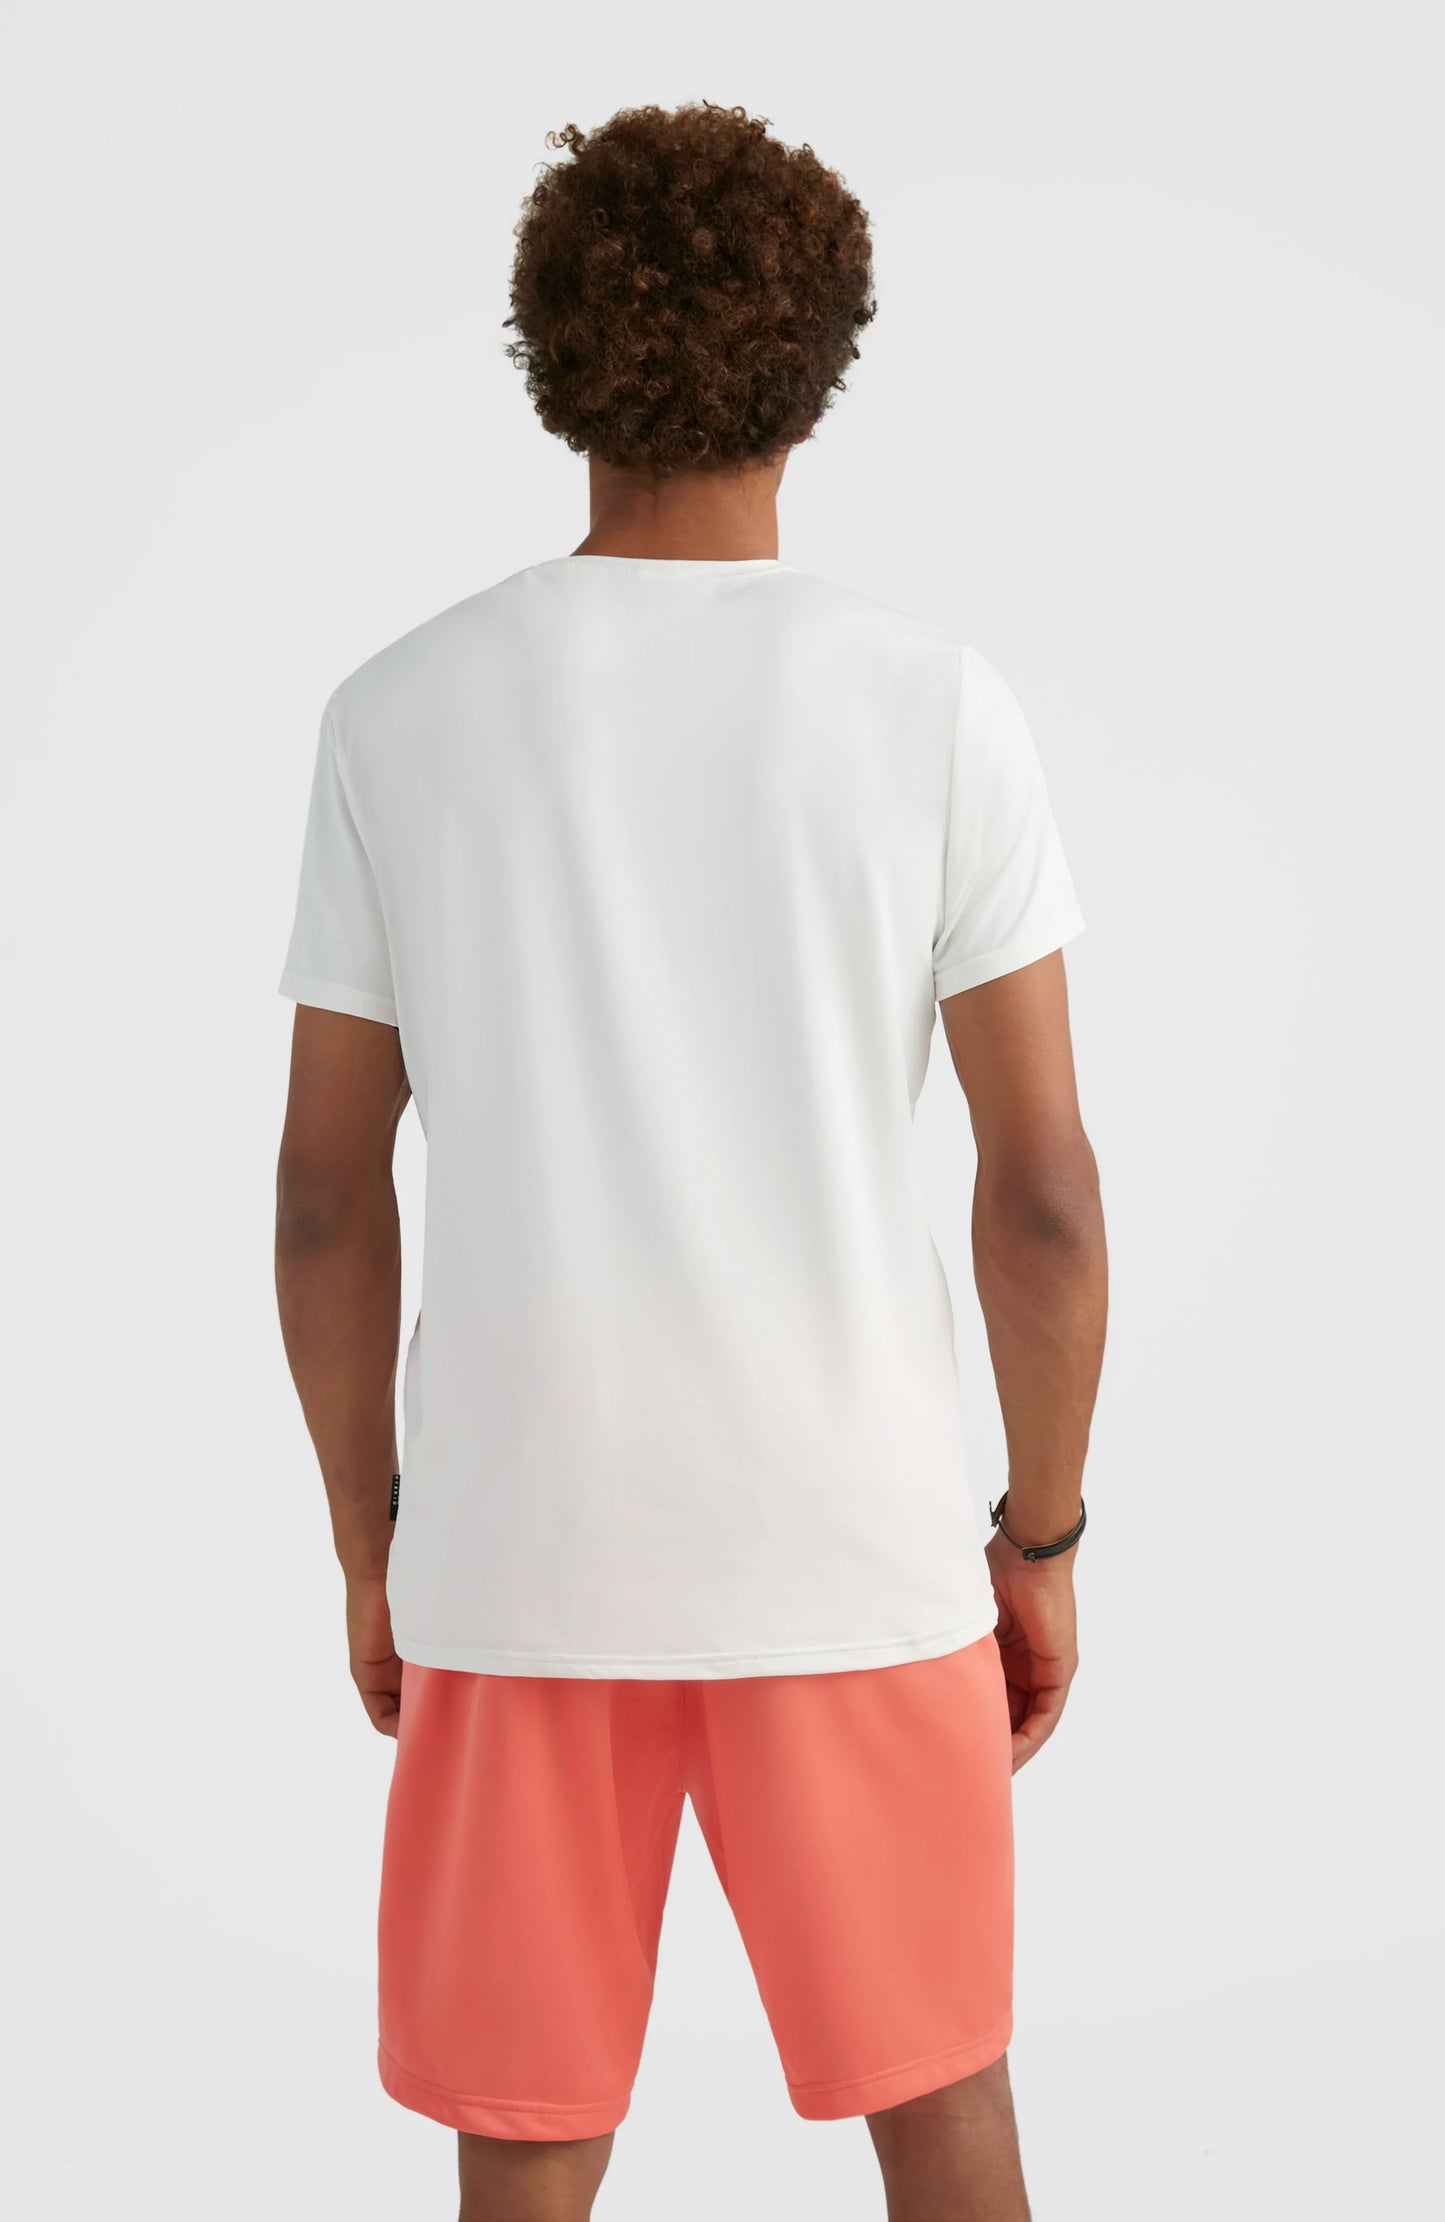 O'Neill T-Shirt in White color